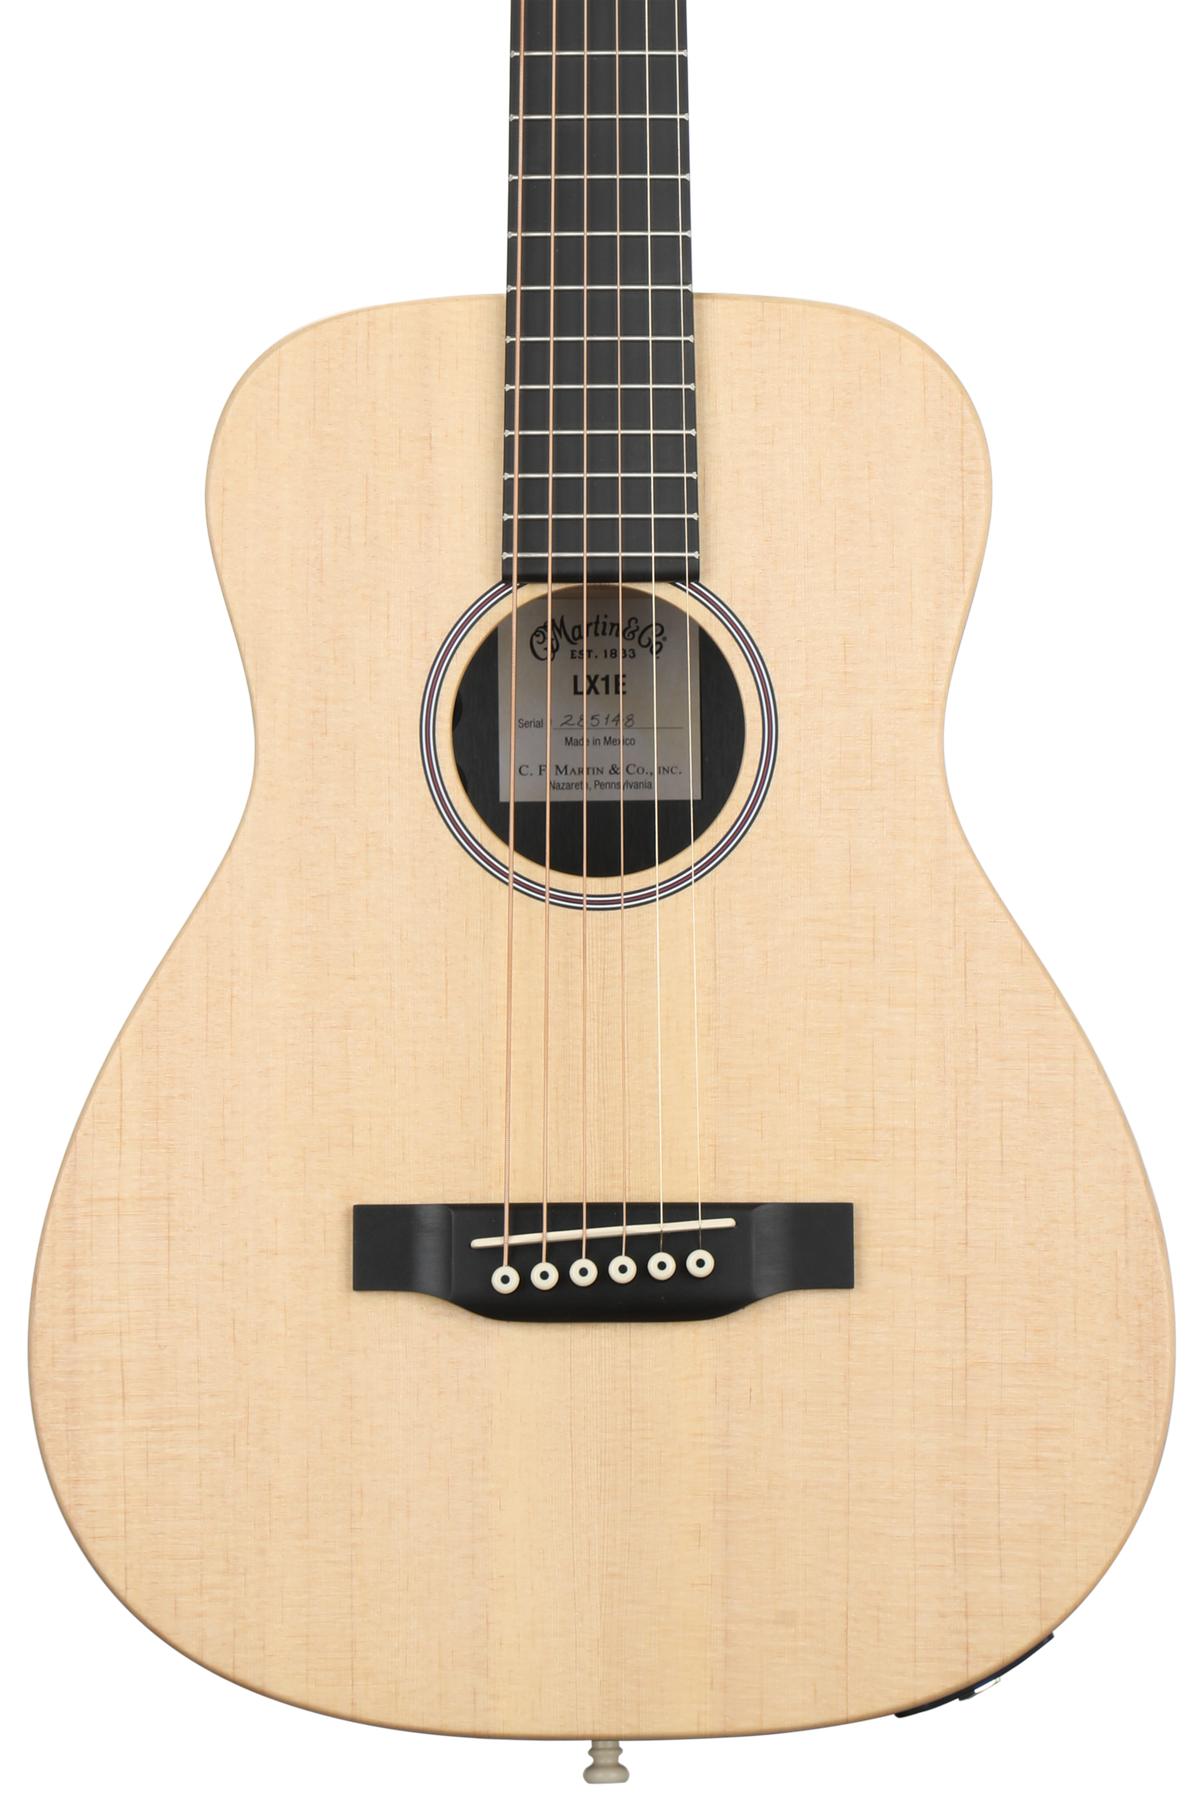 Little Martin LXK2 - Review of Small Acoustic Guitar